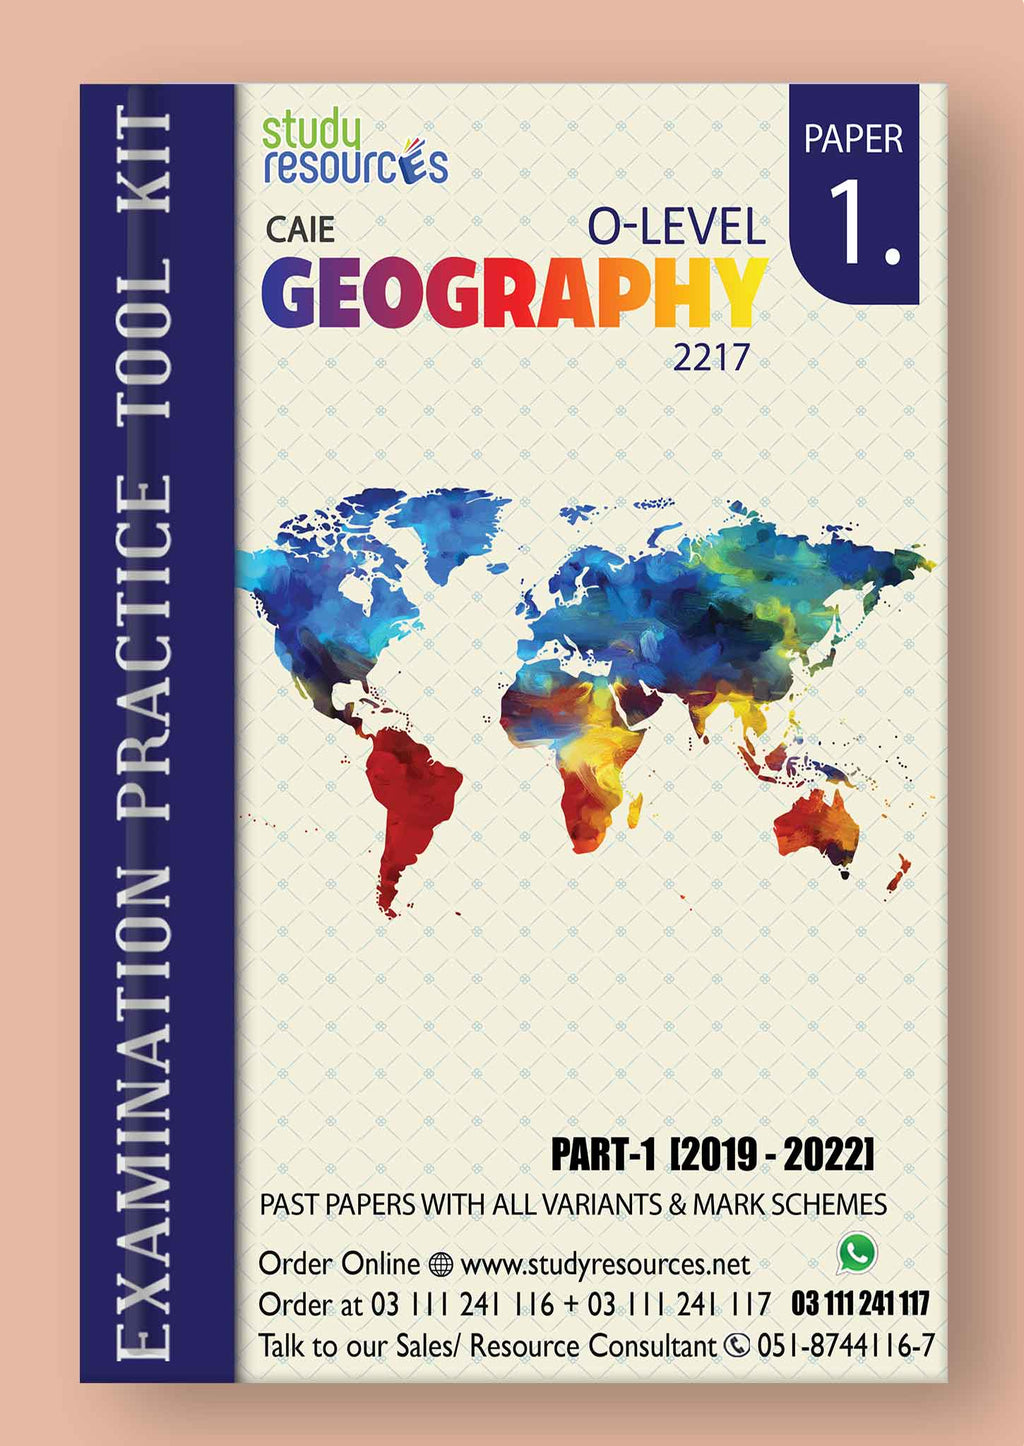 Cambridge O-Level Geography (2217) P-1 Past Papers Part-1 (2019-2022)